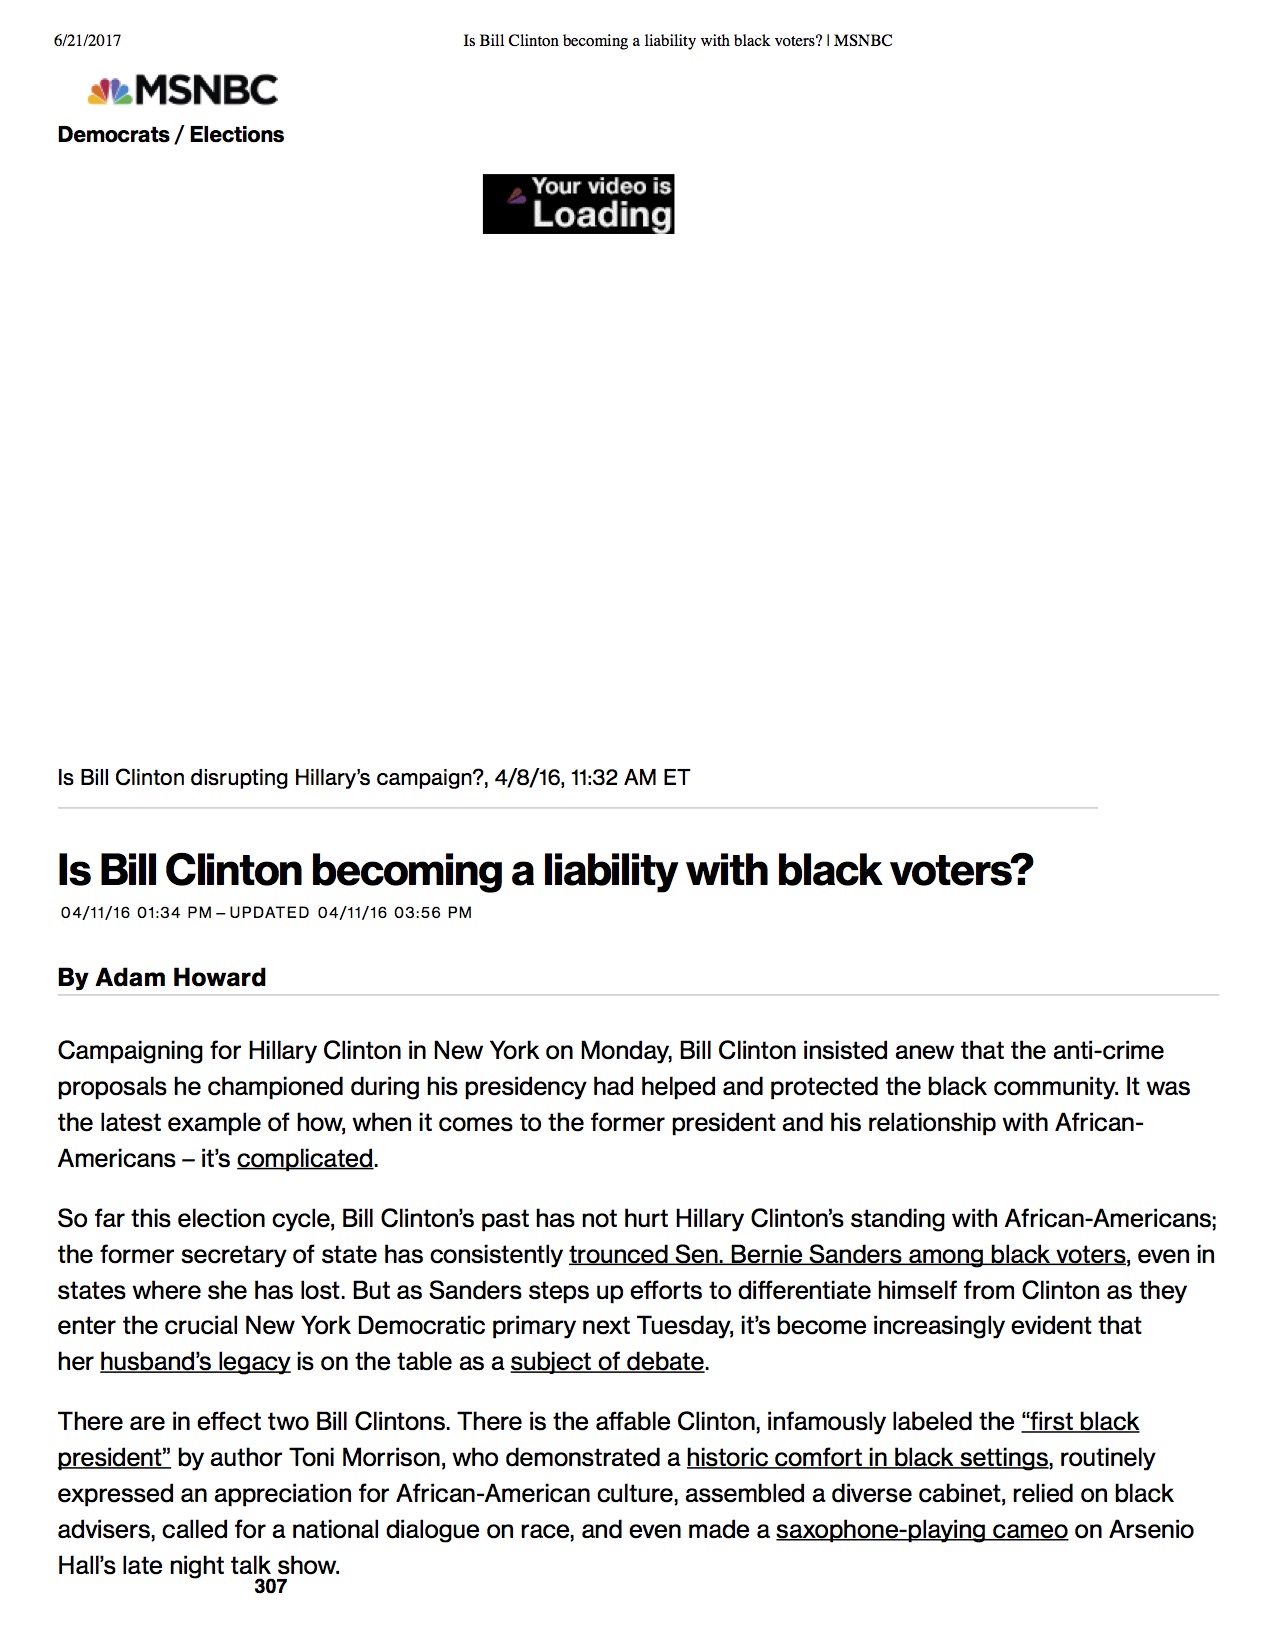 1Is Bill Clinton becoming a liability with black voters_ _ MSNBC.jpg